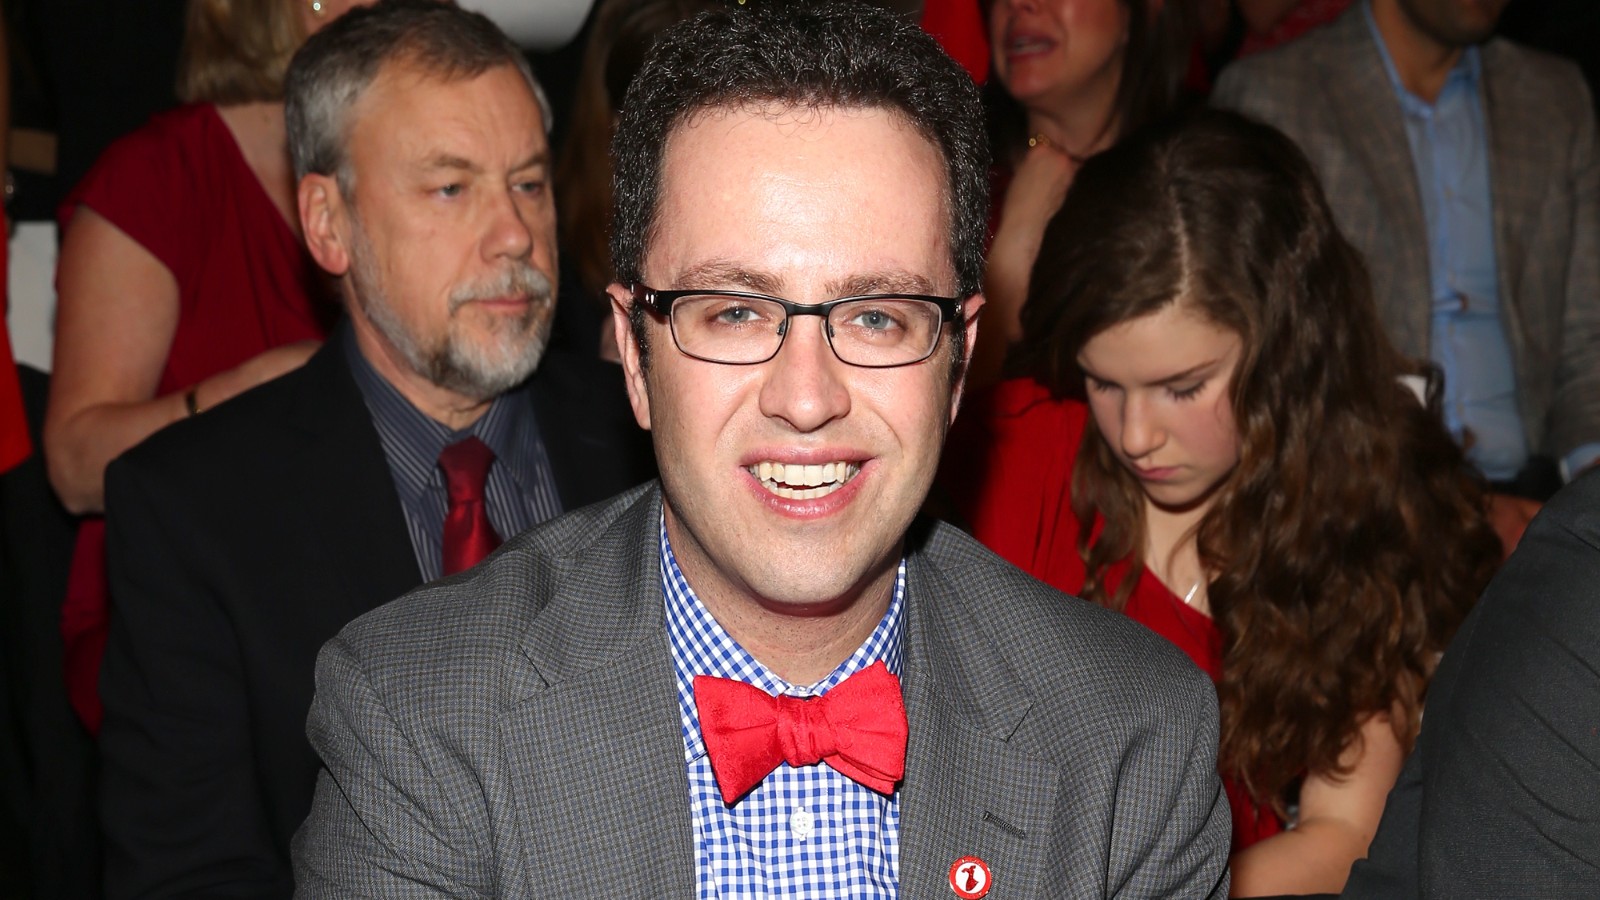 Jared Fogle From Inspiration To Accused Sex Offender Cnn 4589